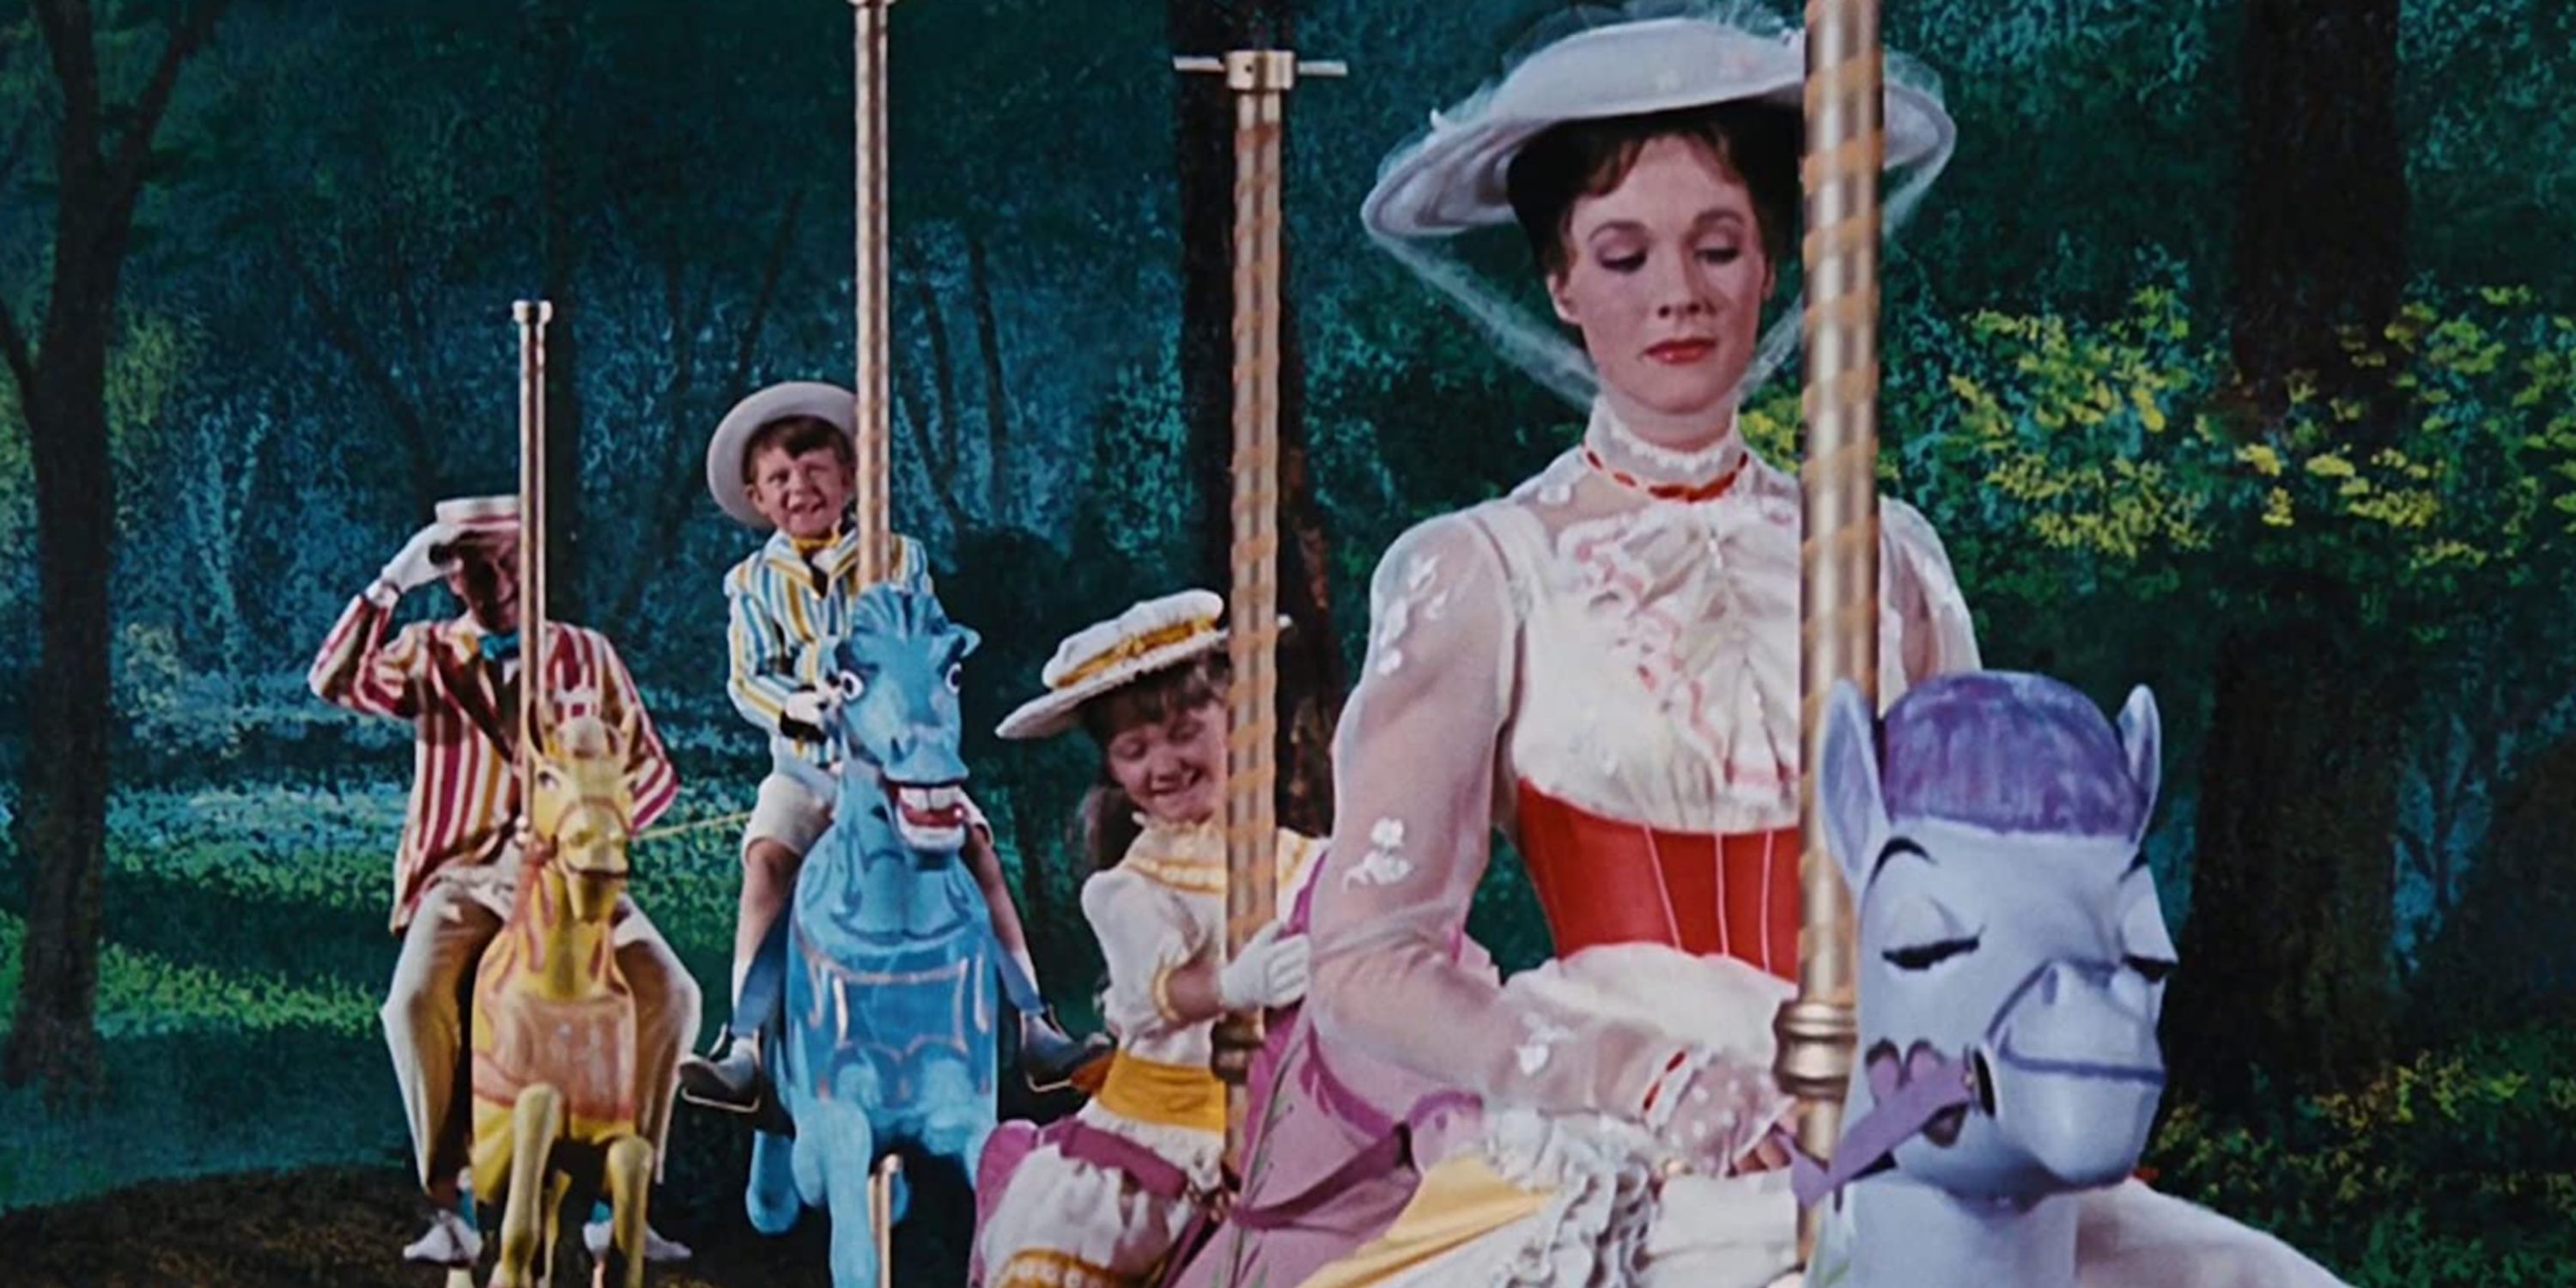 Mary Poppins Carousel Merry Go Round